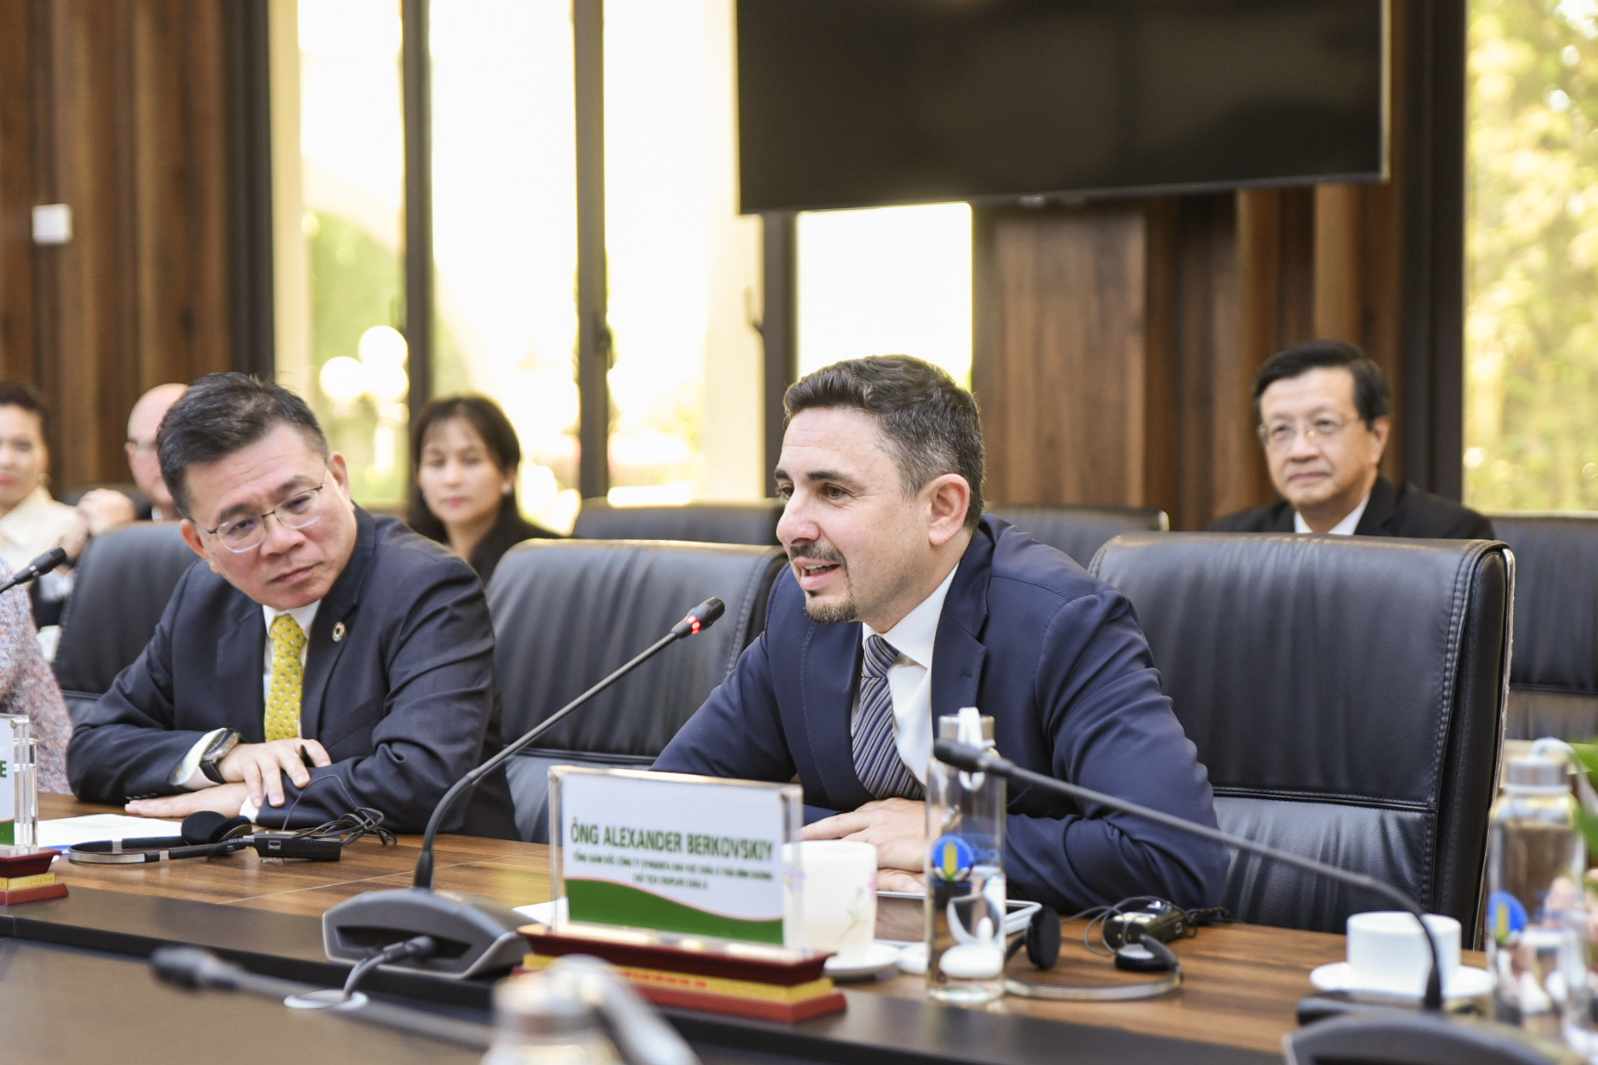 Mr. Alexander Berkovskiy, President of CropLife Asia, considers Vietnamese farmers to be 'agricultural heroes.' Photo: Quynh Chi.